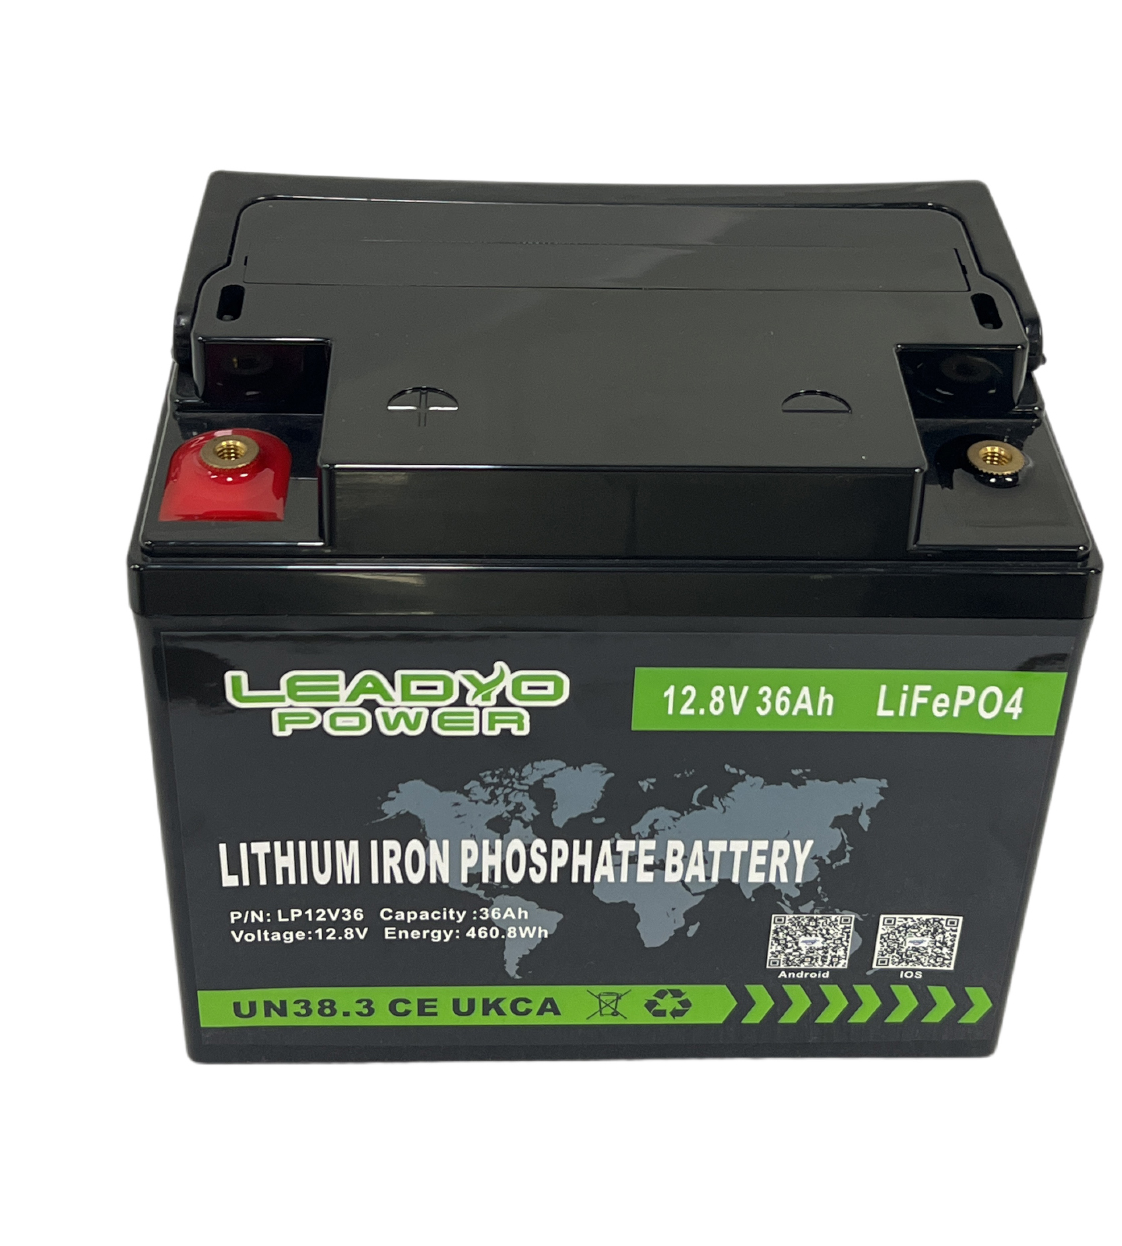 Leadyo Power's LifePO4 Batteries - A Revolution in Power Solutions